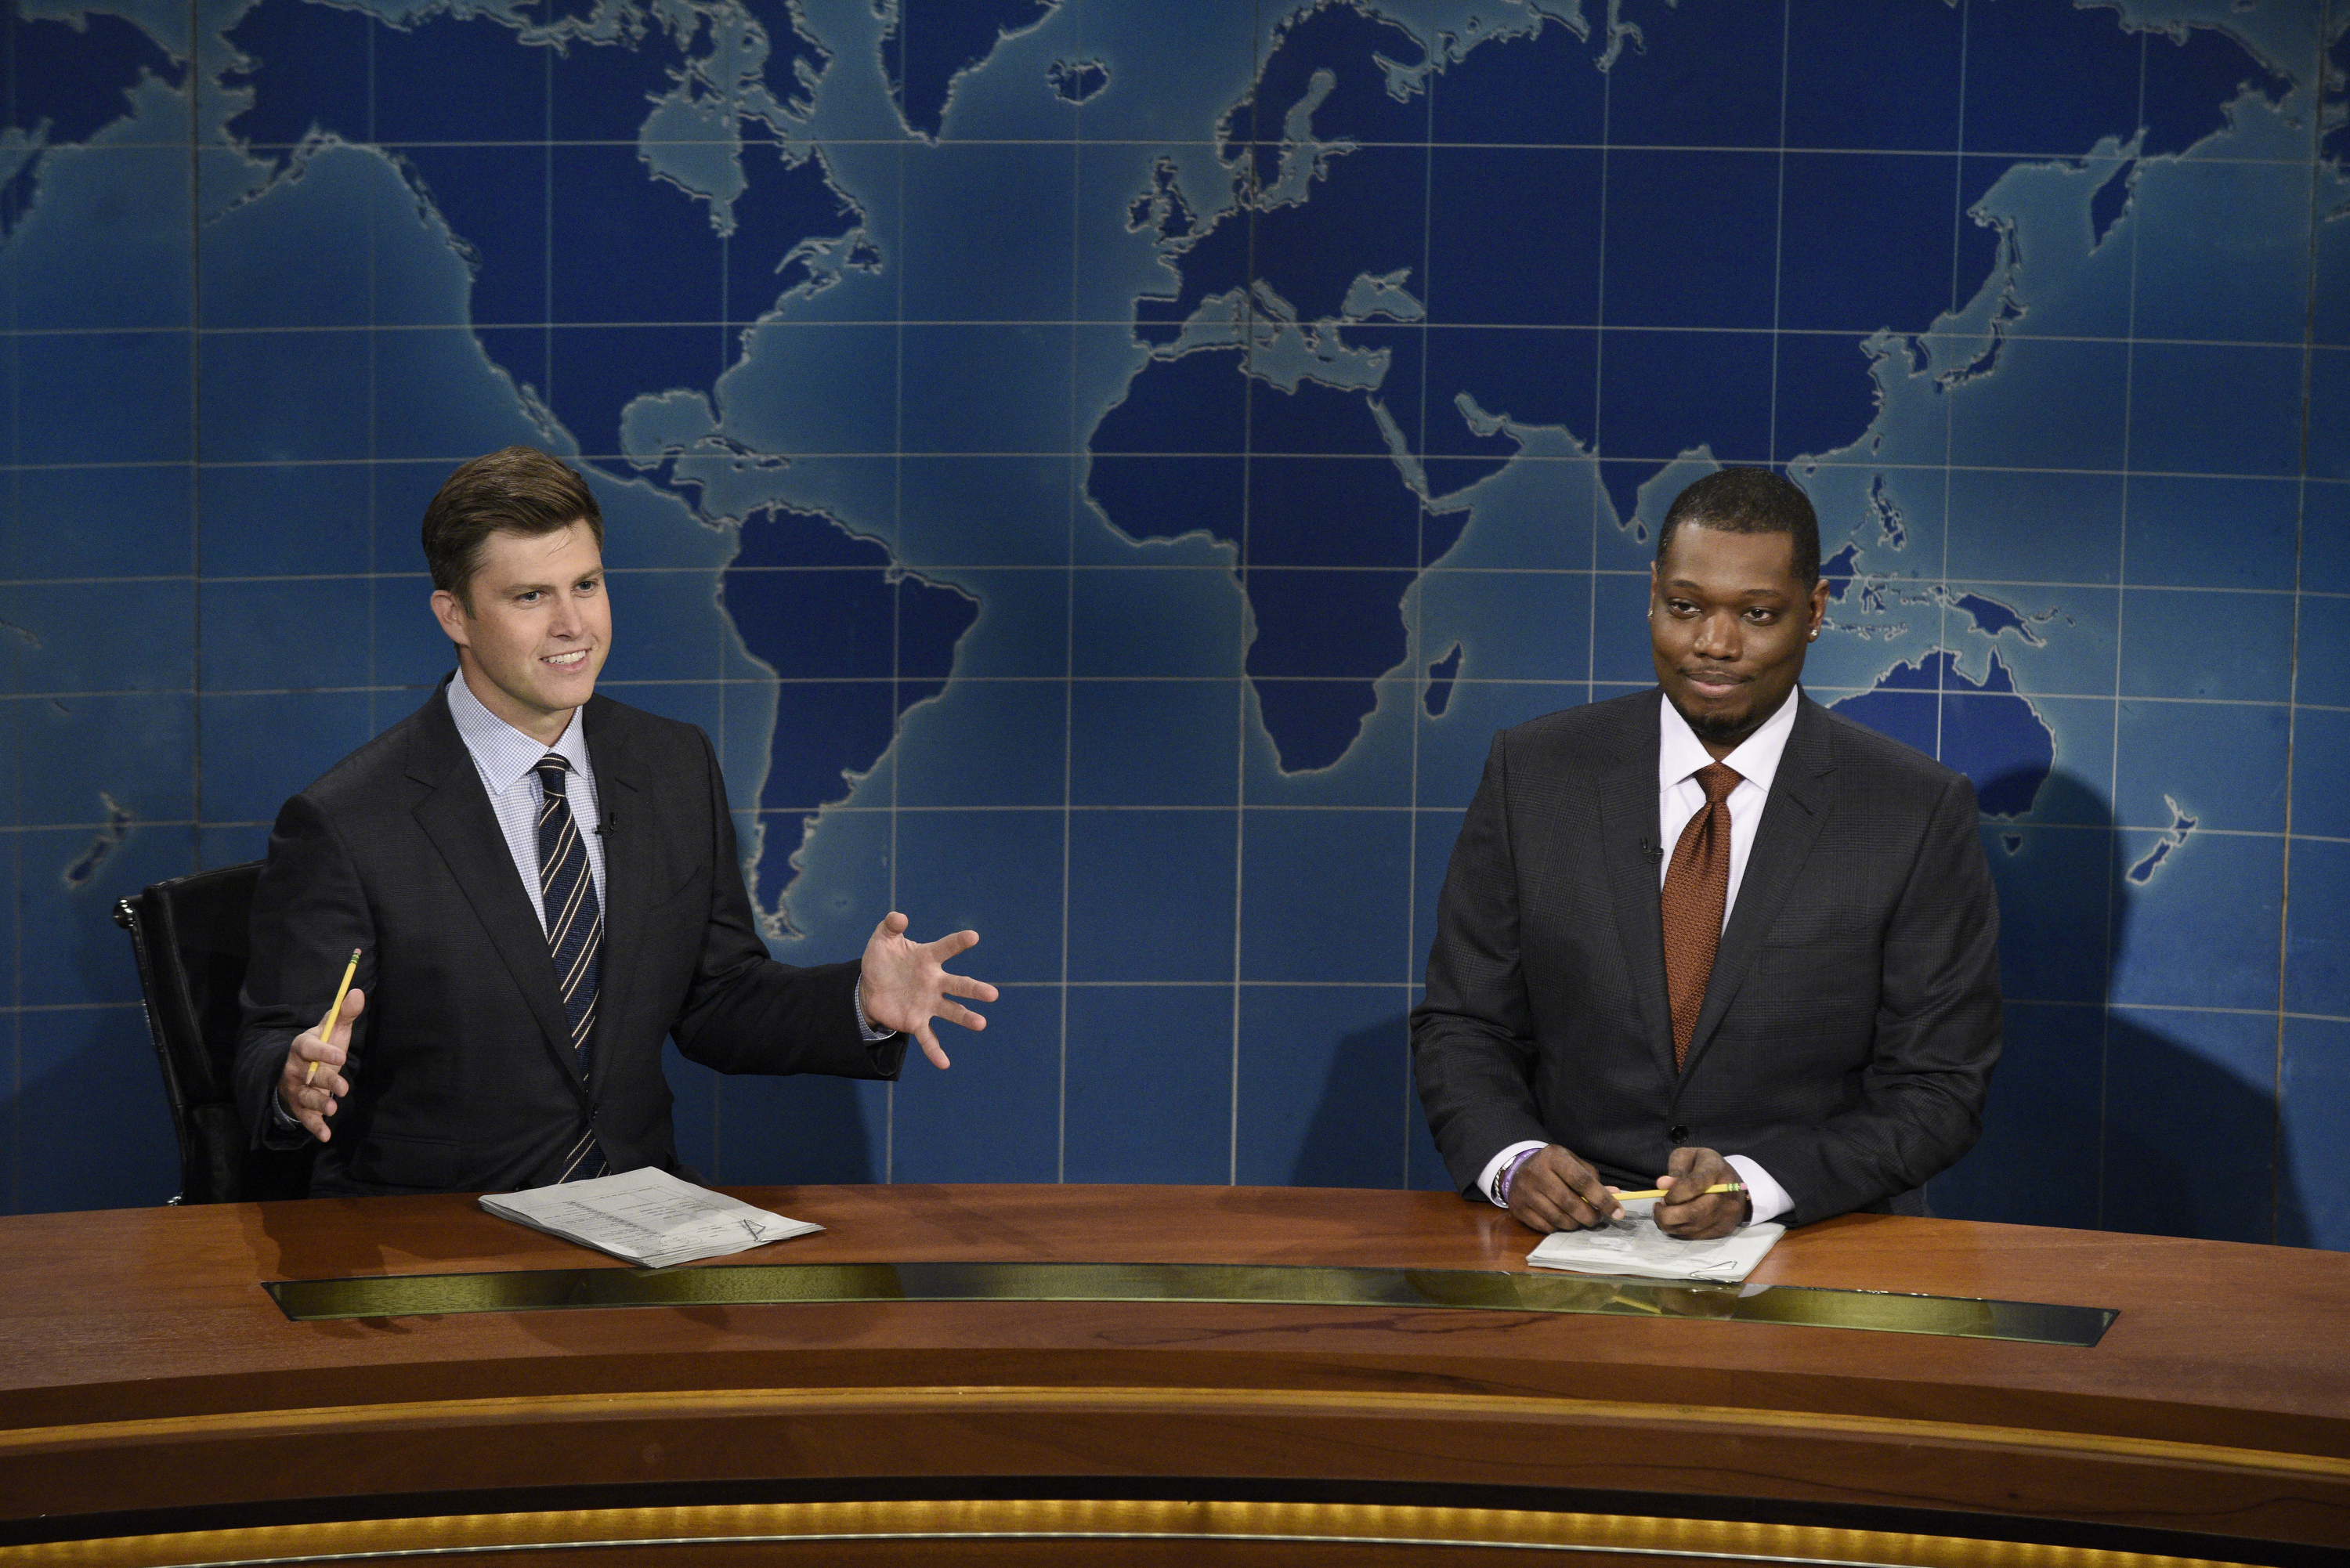 Colin Jost and Michael Che during Saturday Night Live's Weekend Update on October 3, 2020 (NBCU Photo Bank via Getty Images&mdash;2020 NBCUniversal Media, LLC)